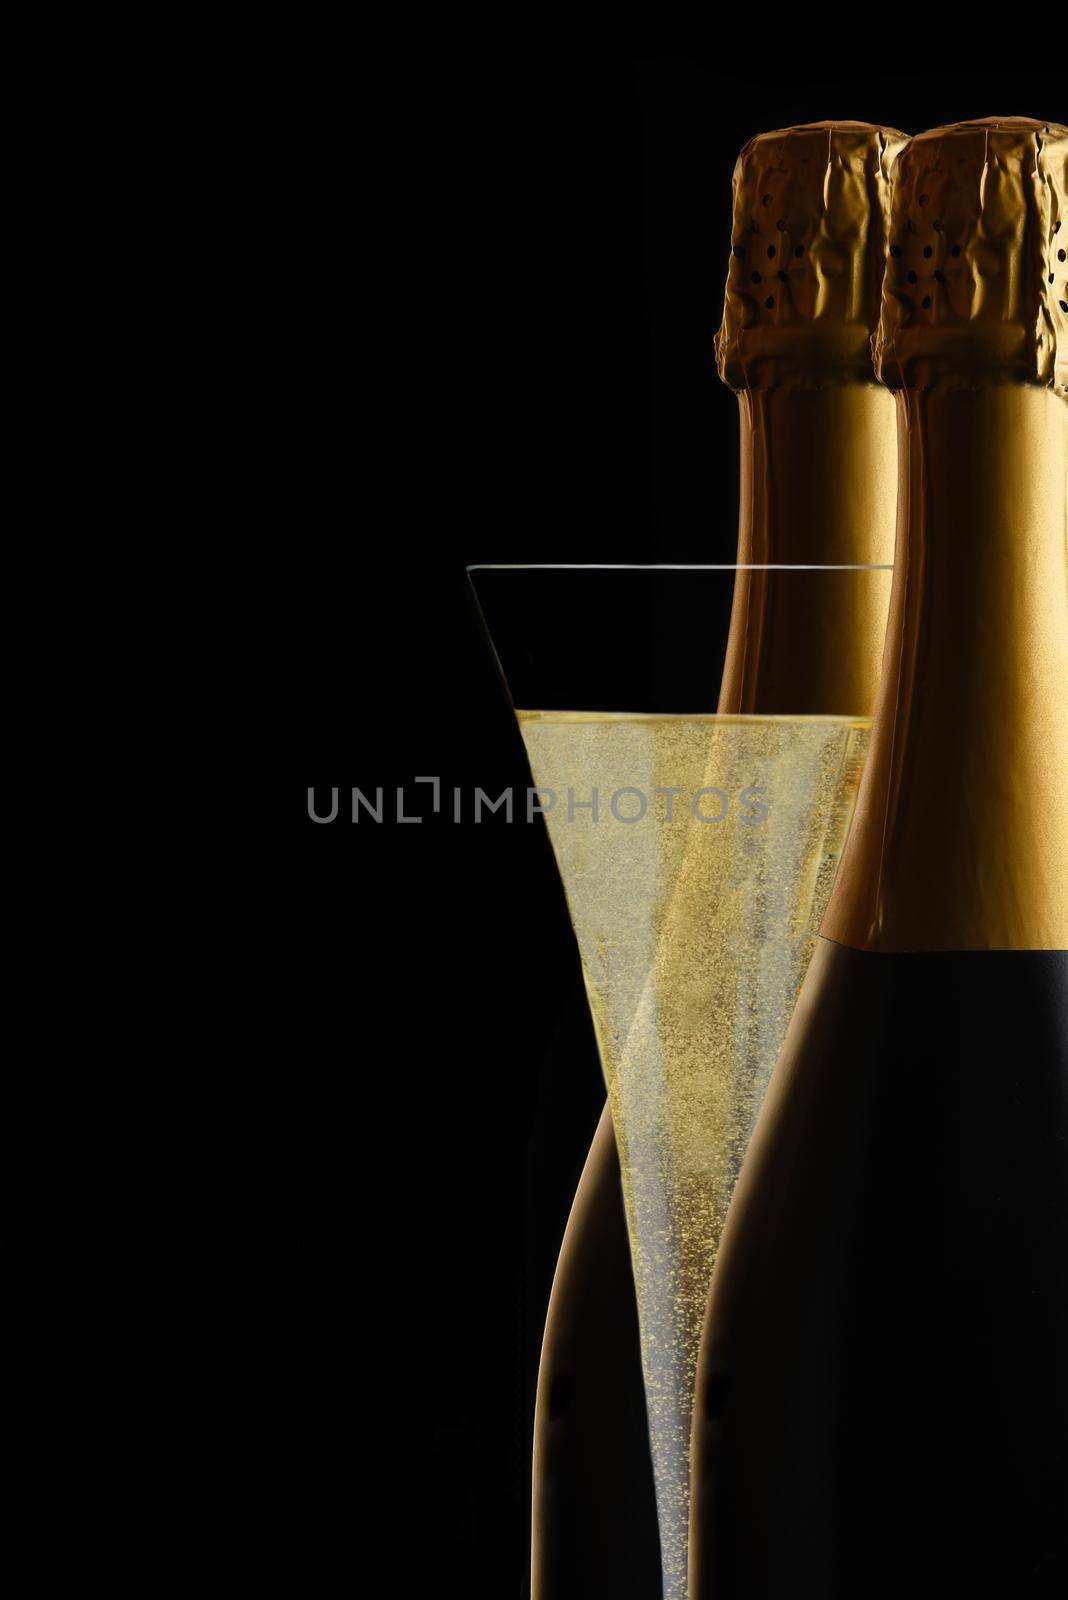 A Champagne Flute between two bottles of Sparkling Wine against a black background..